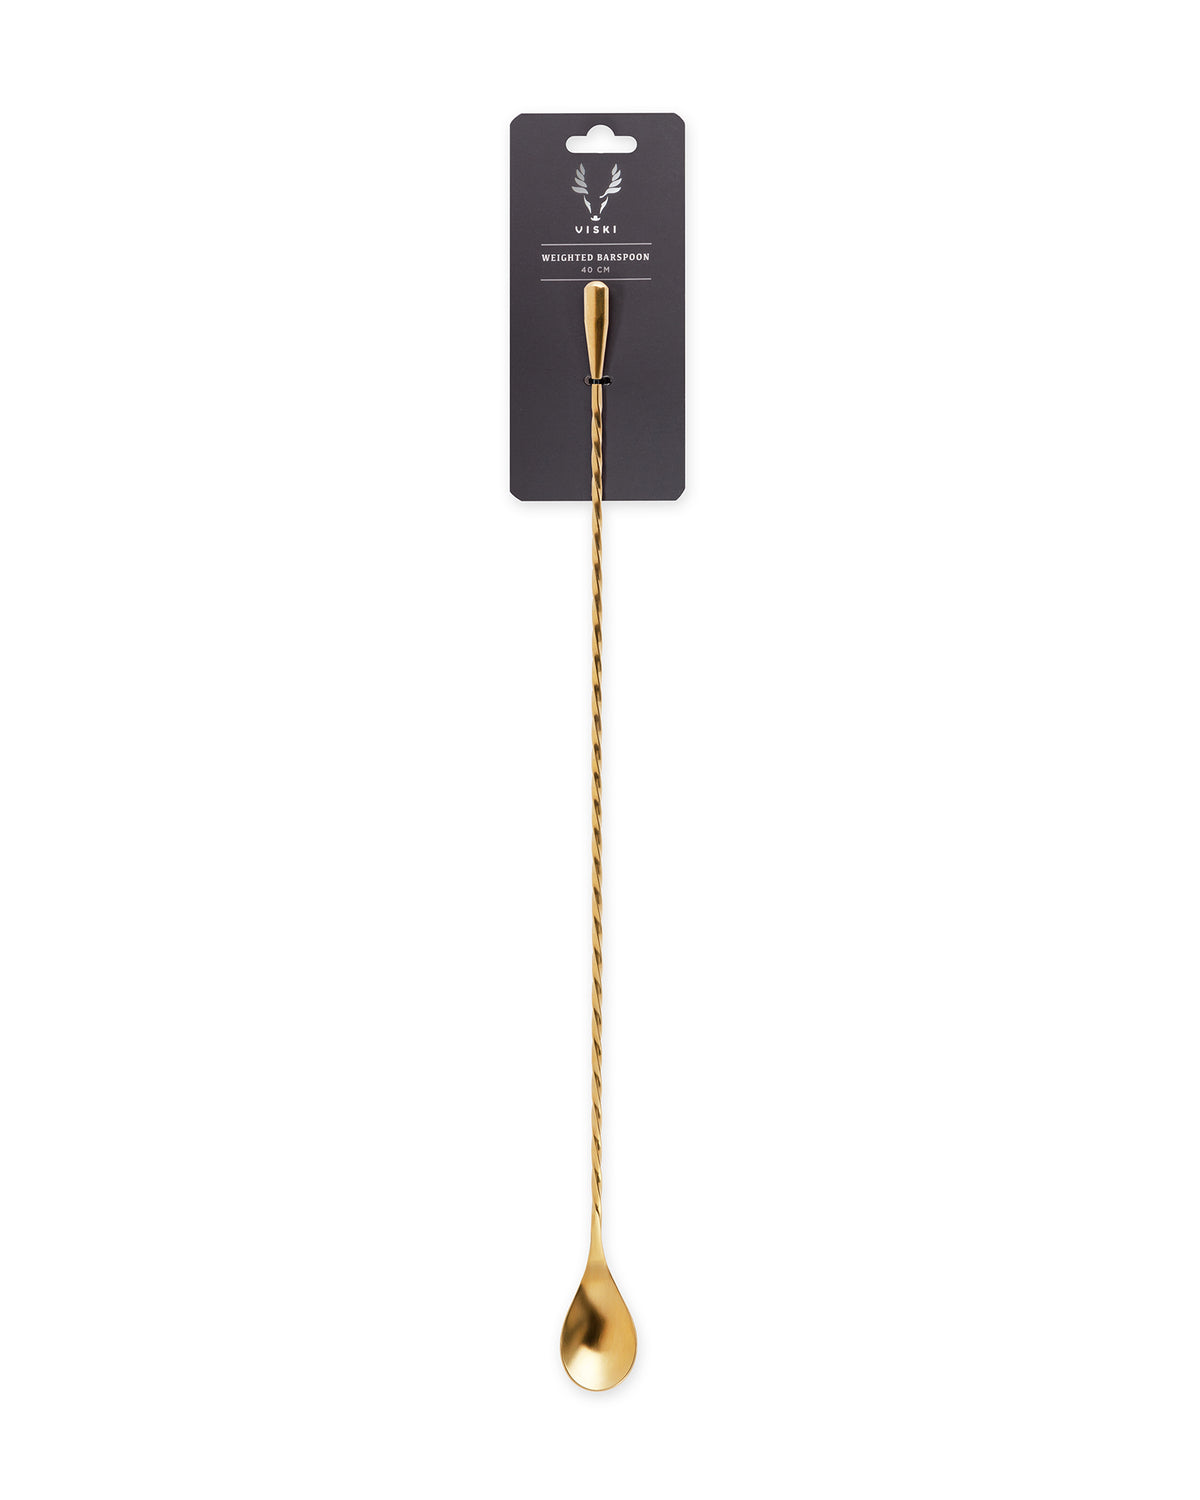 40Cm Gold Weighted Barspoon